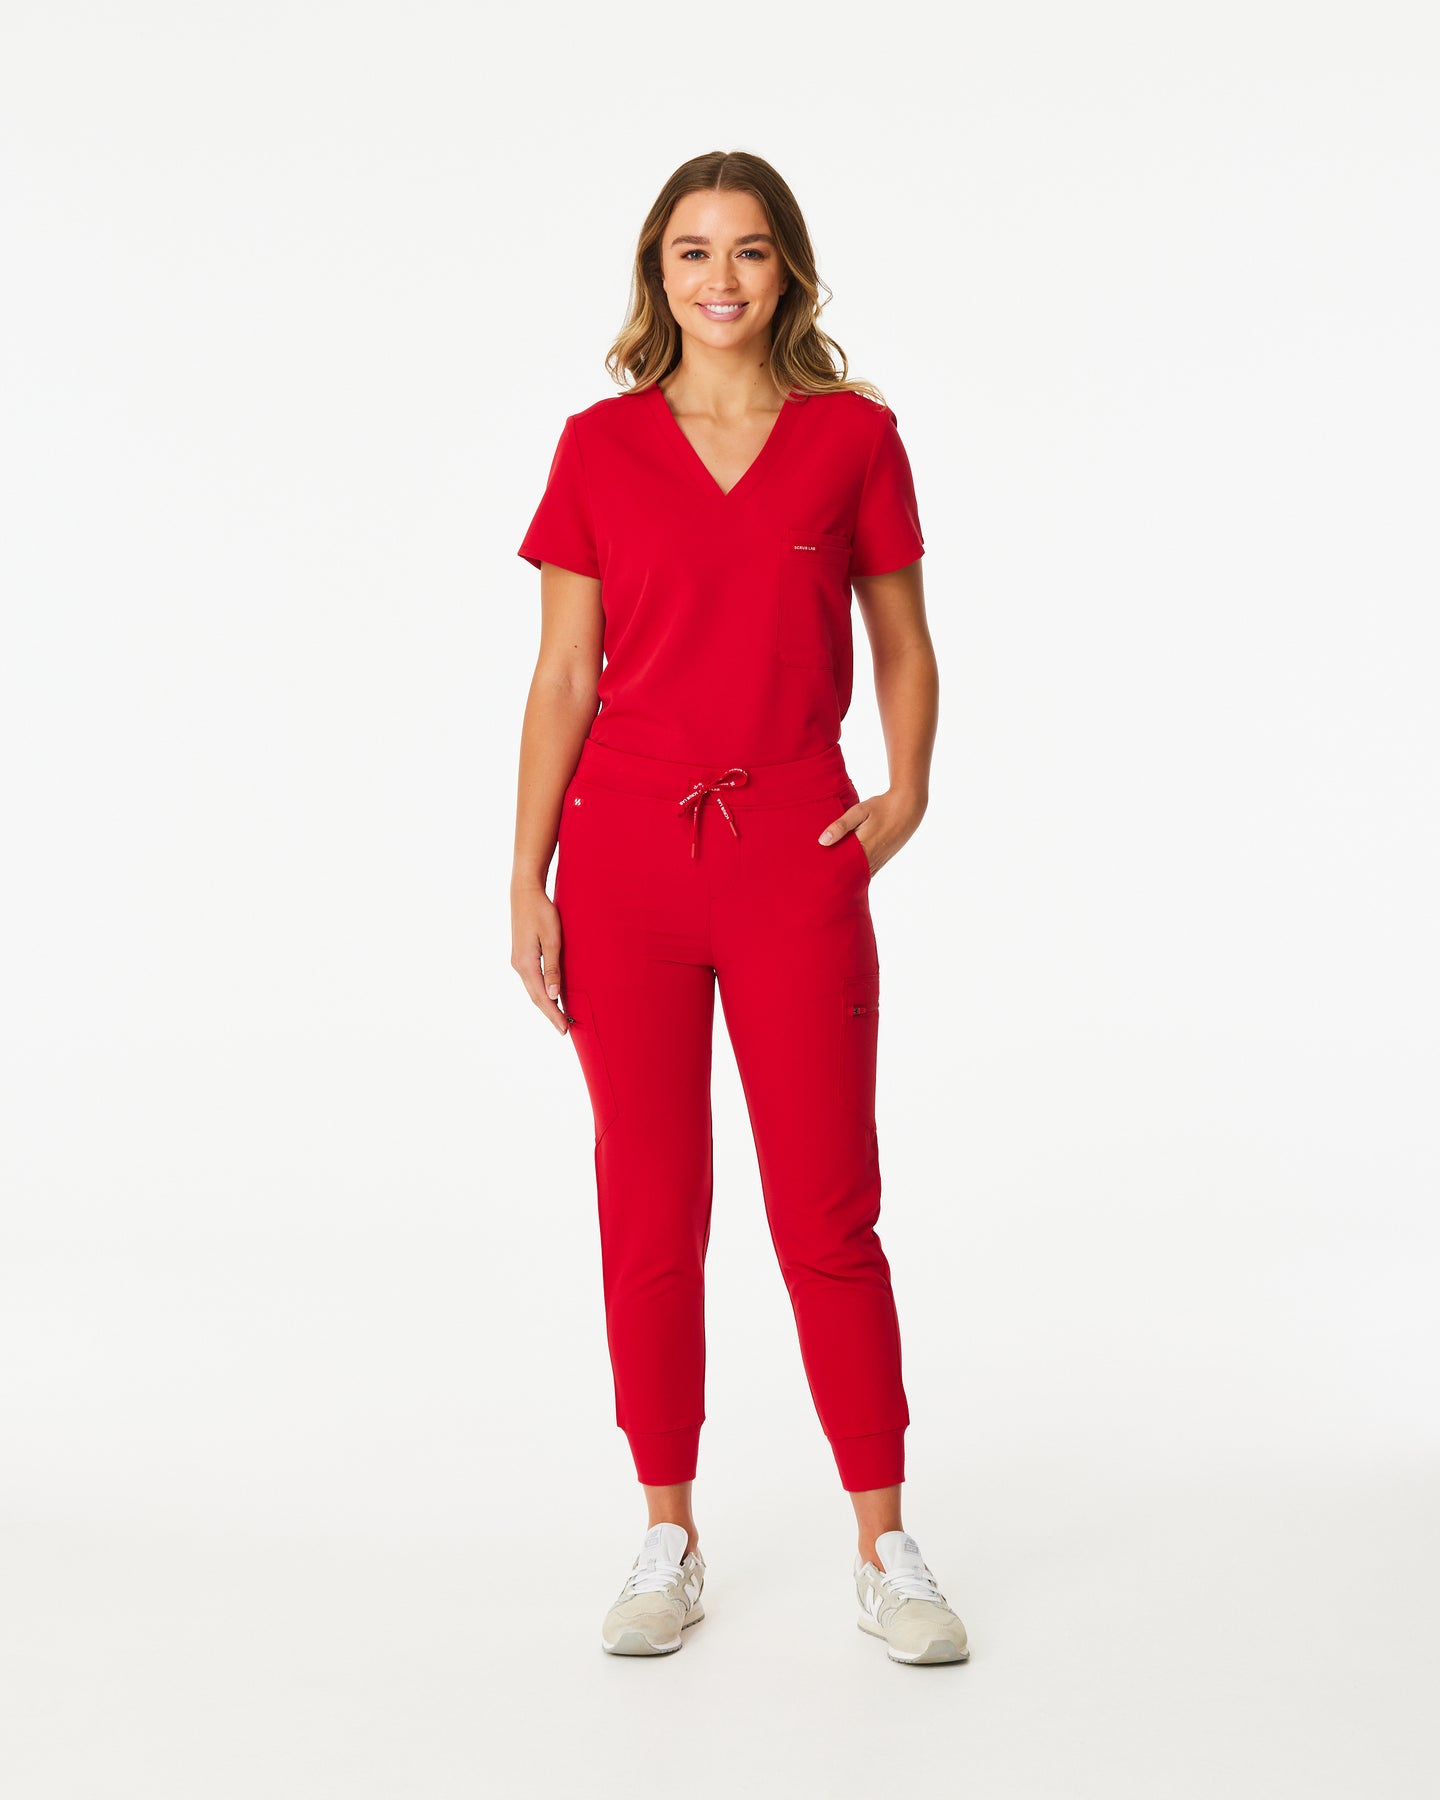 Women Uniforms For Less  Buy Womens Scrubs And Save.